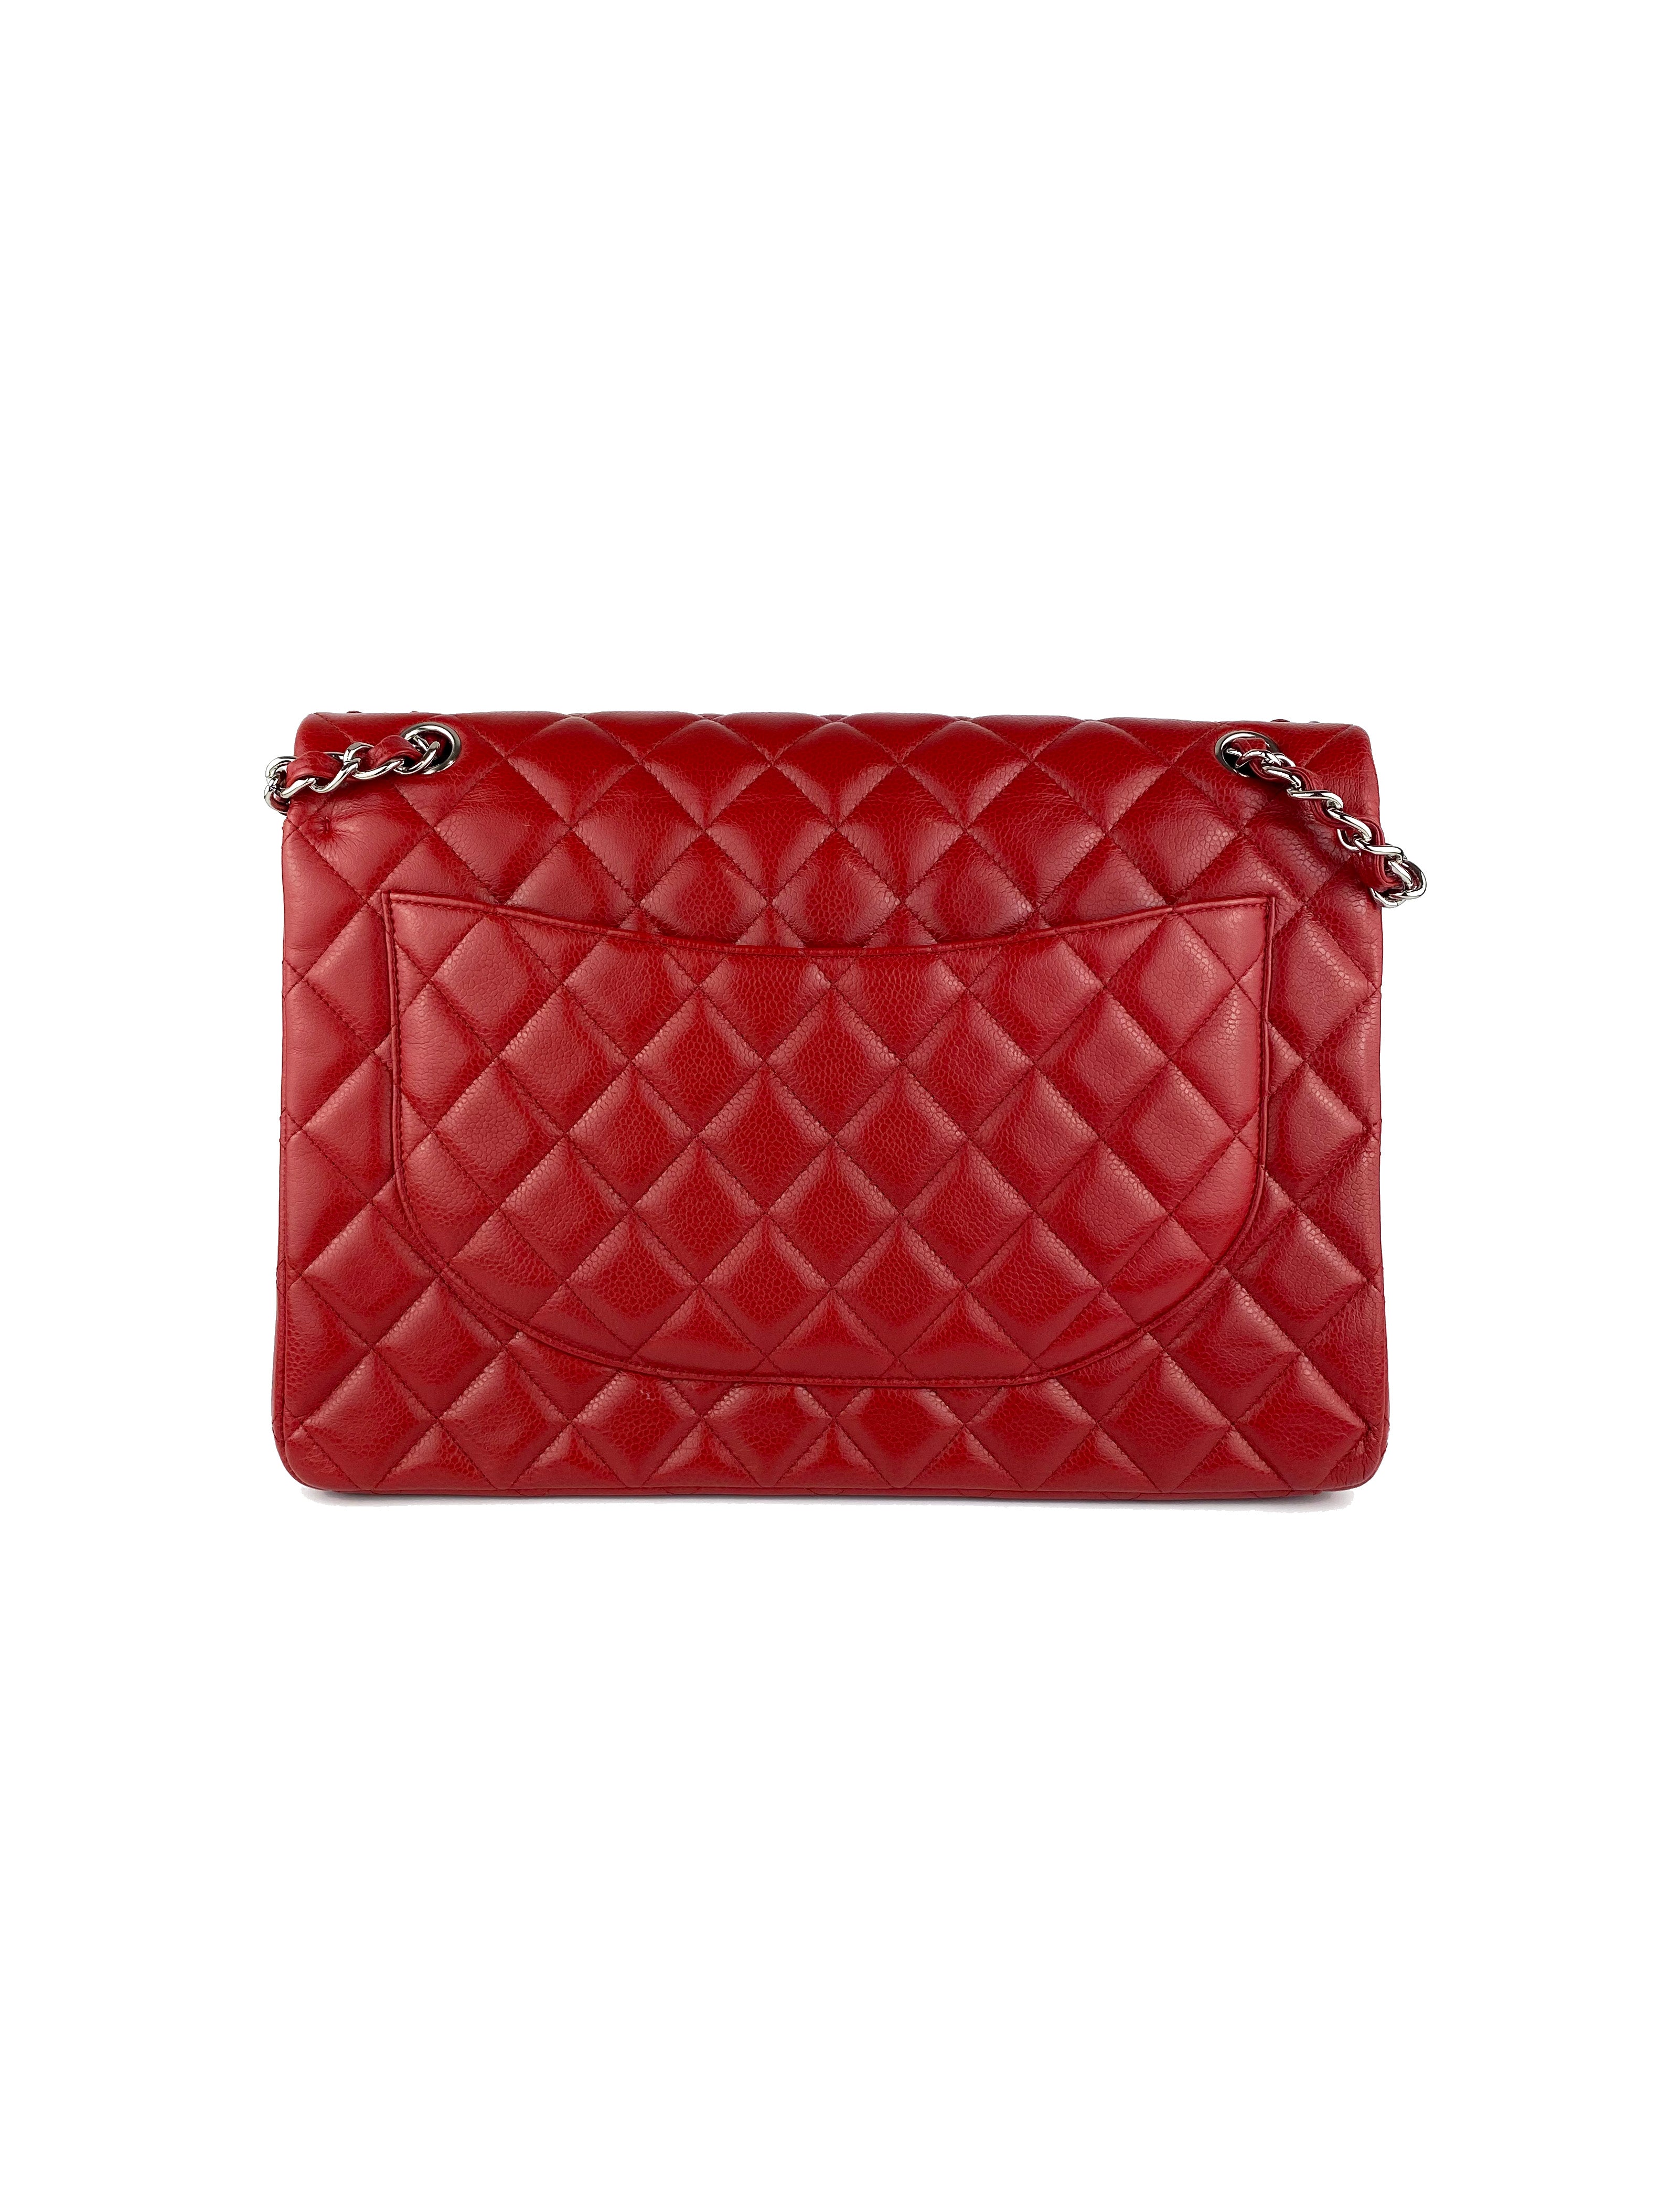 chanel-maxi-classic-flap-red-15.jpg